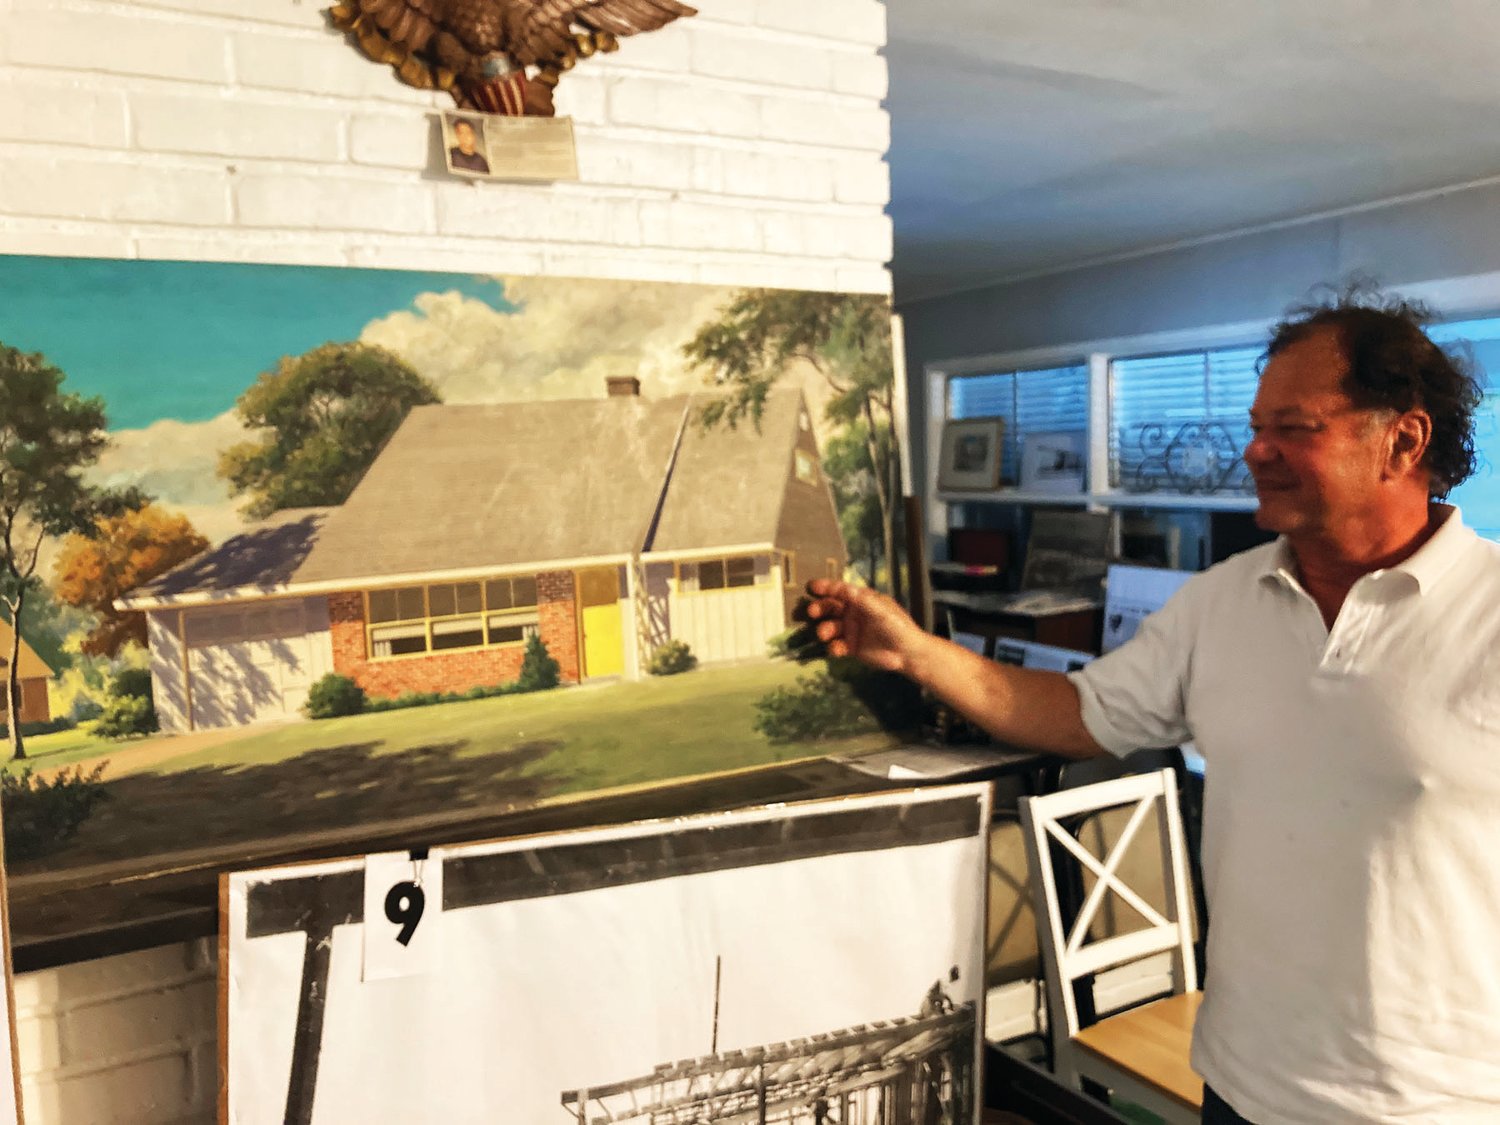 David Marable points to one of the original prints of Levittown house models, part of his vast Levittown collection.